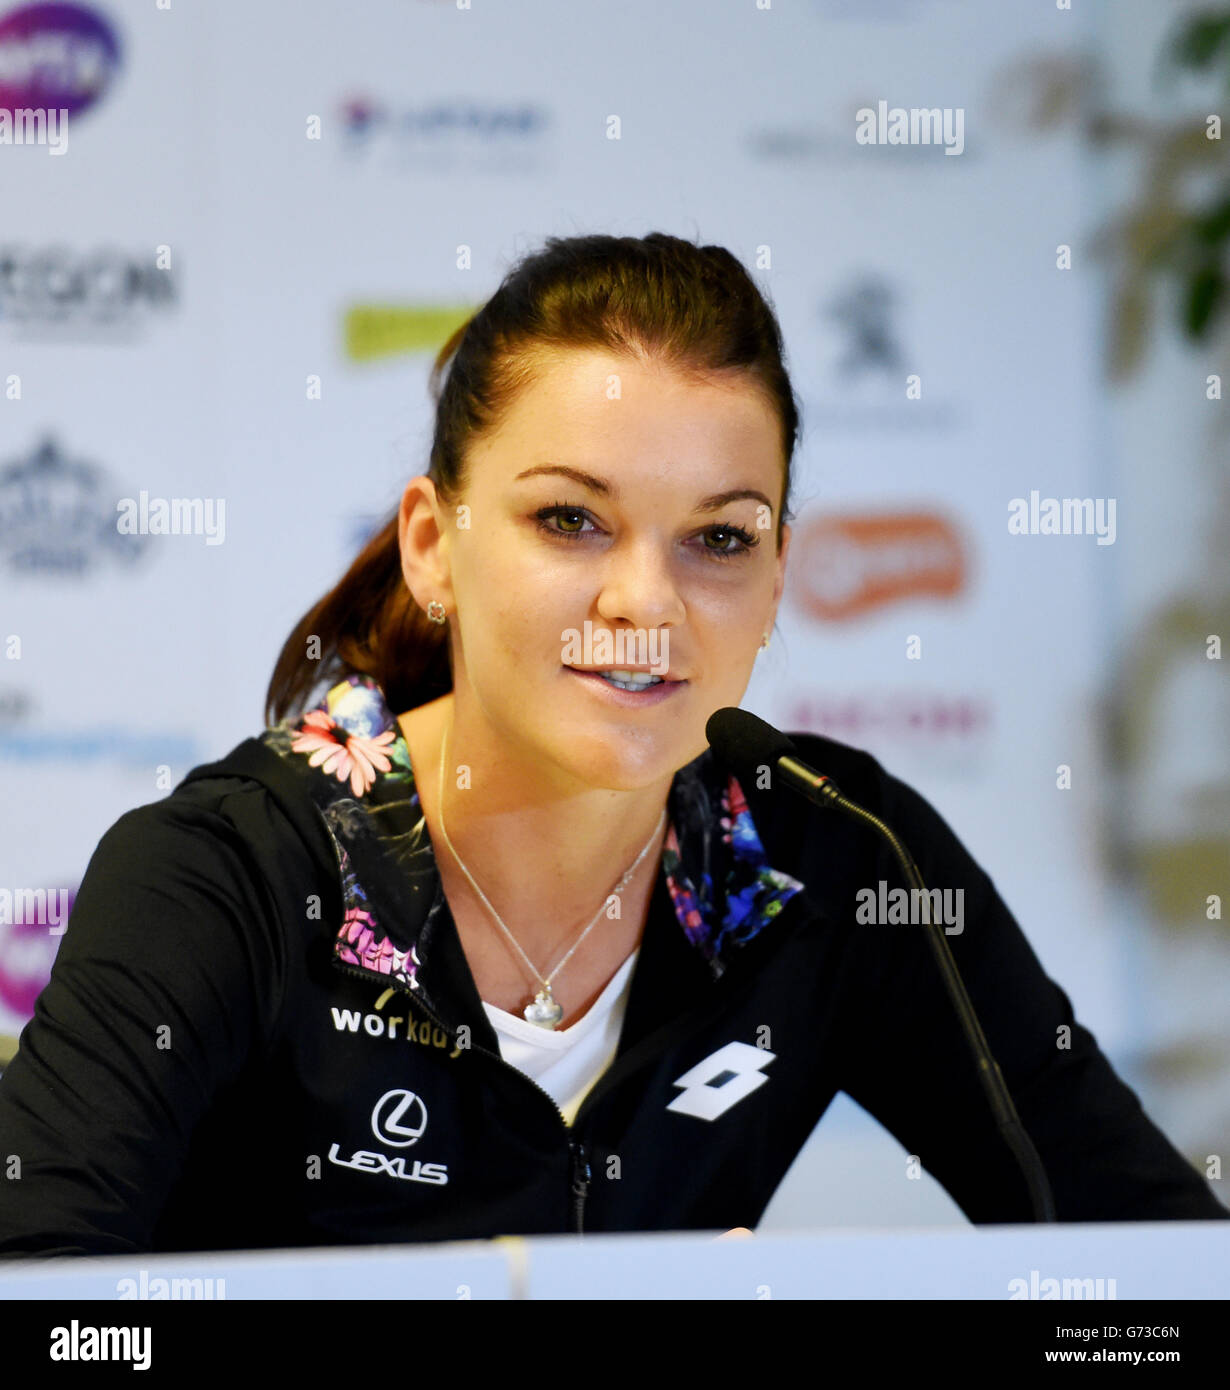 EDITORIAL USE ONLY - Agnieszka Radwanska from Poland speaking at a press conference during The Aegon International Tournament at Devonshire Park, Eastbourne, Southern England. June 20, 2016. Simon  Dack / Telephoto Images Stock Photo